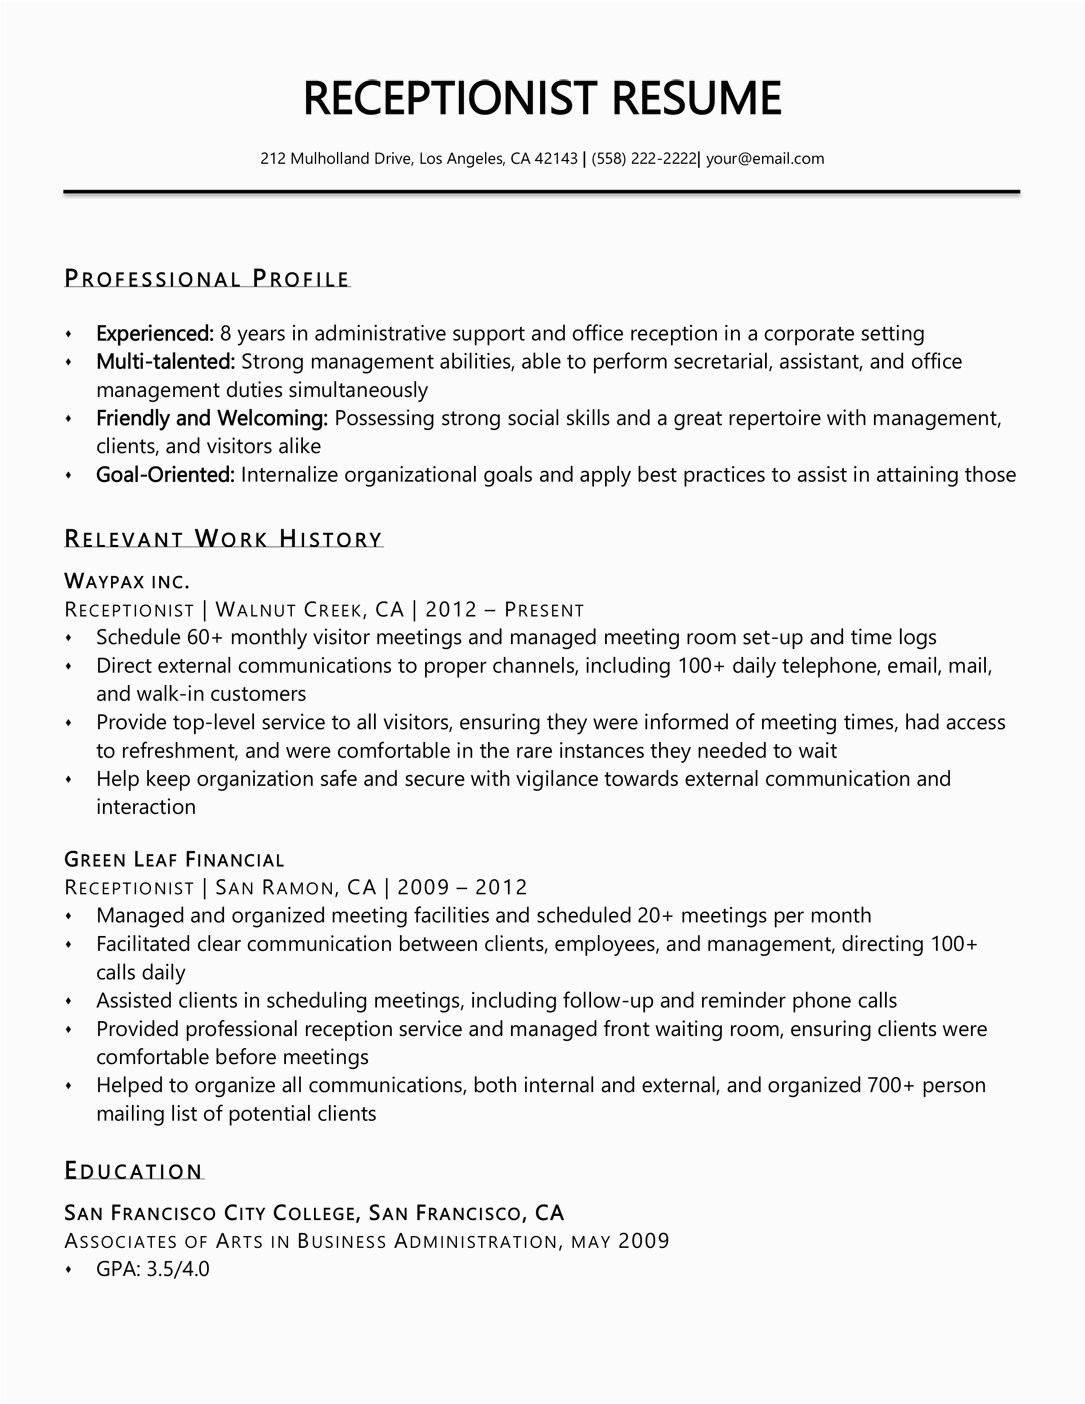 Samples Of Resumes for Receptionist Position Receptionist Resume Sample